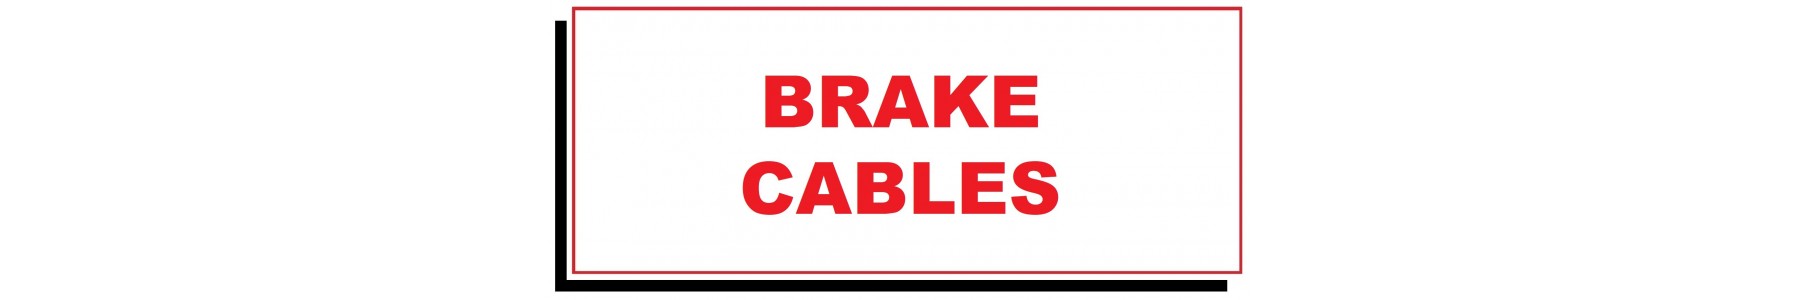 BRAKE CABLES